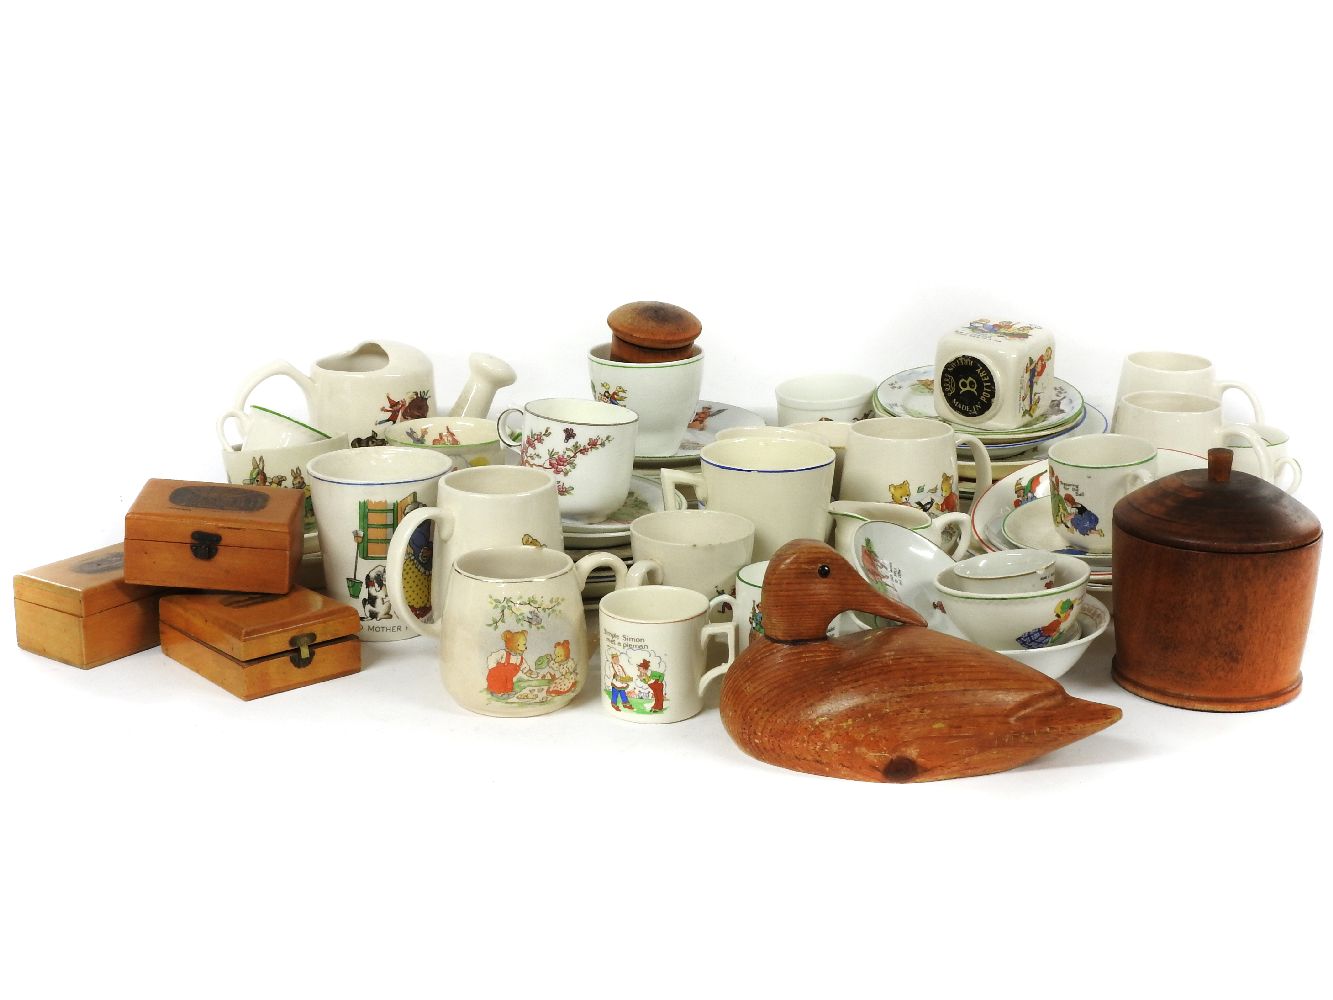 A collection of child's nursery tea wares, cups, saucers, mugs, and various Mauchline ware